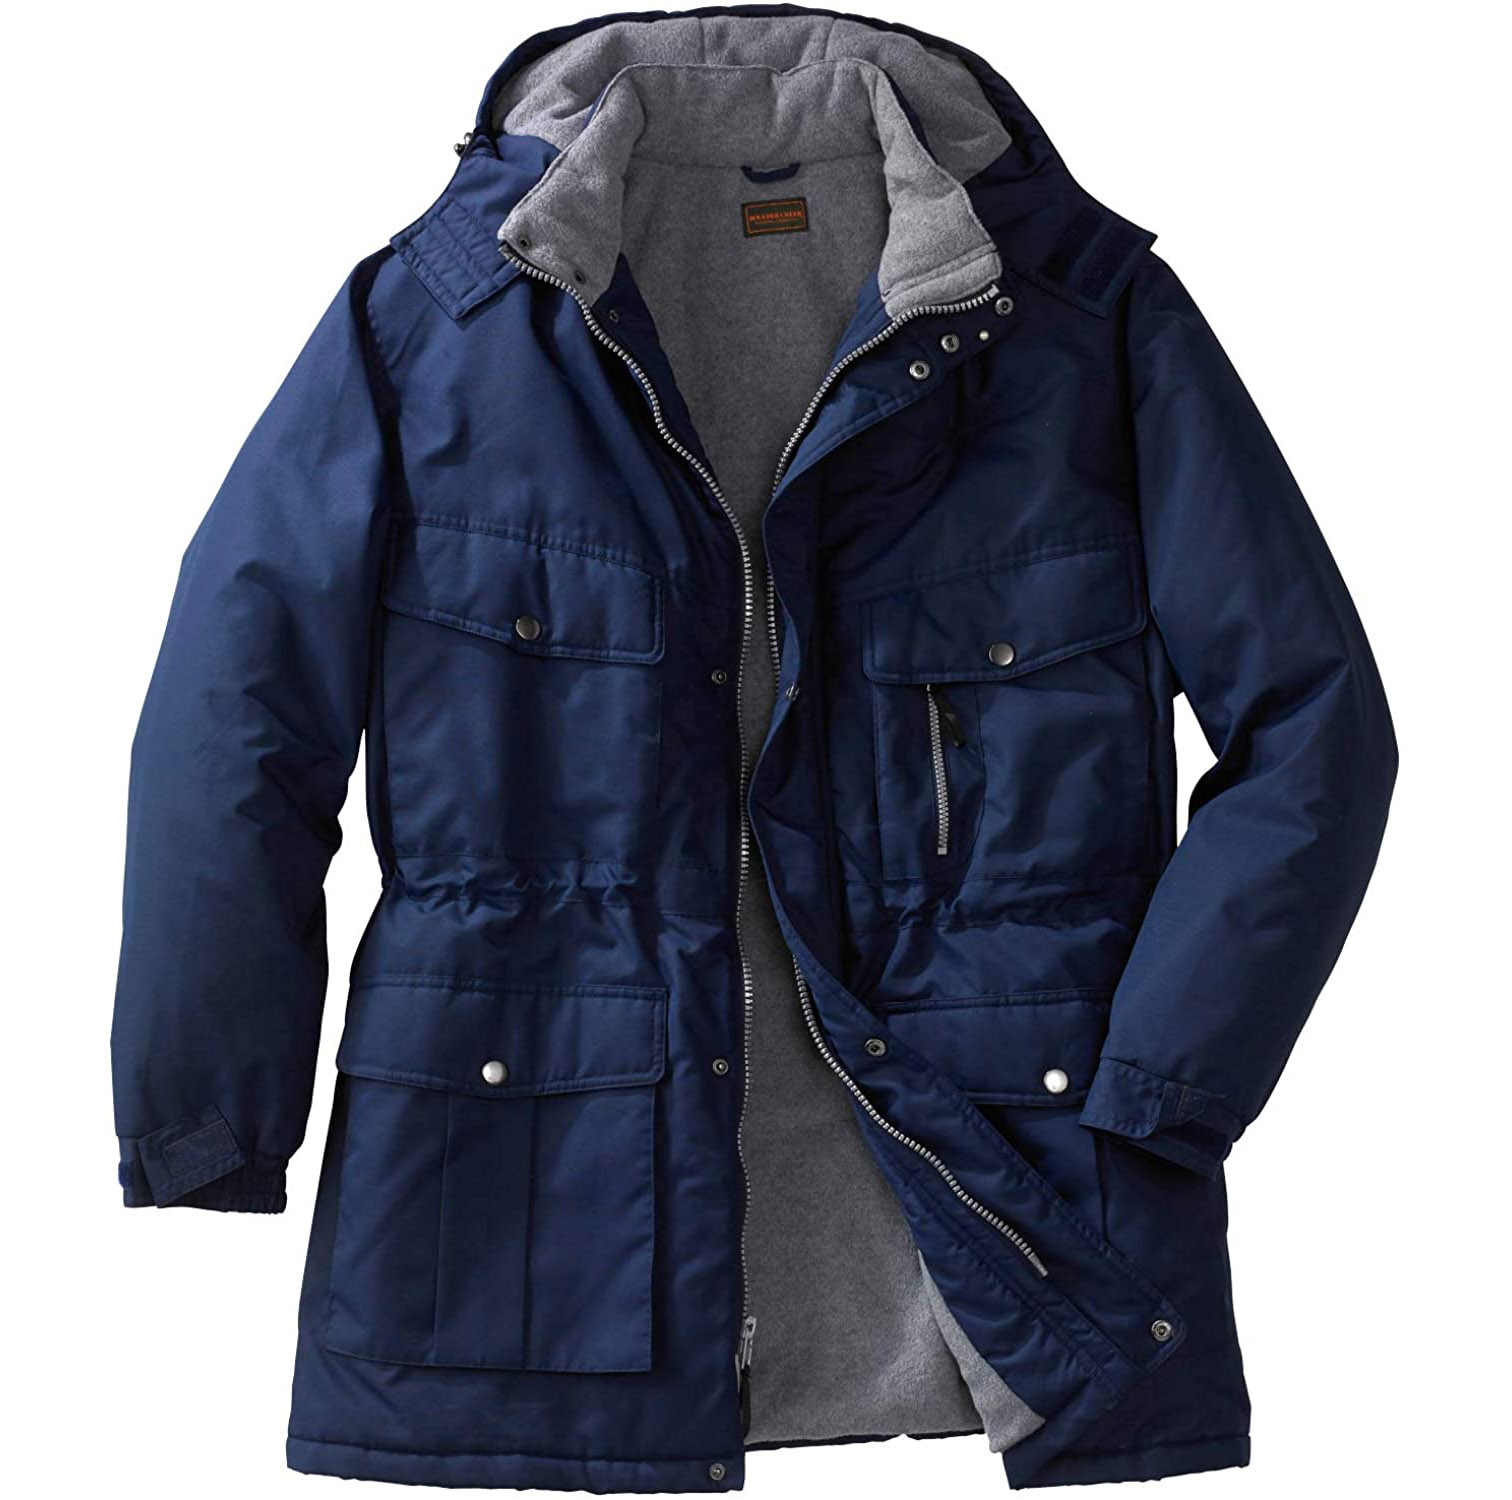 Stay Warm In The Icy Cold With One Of These 12 Best Winter Parkas For ...